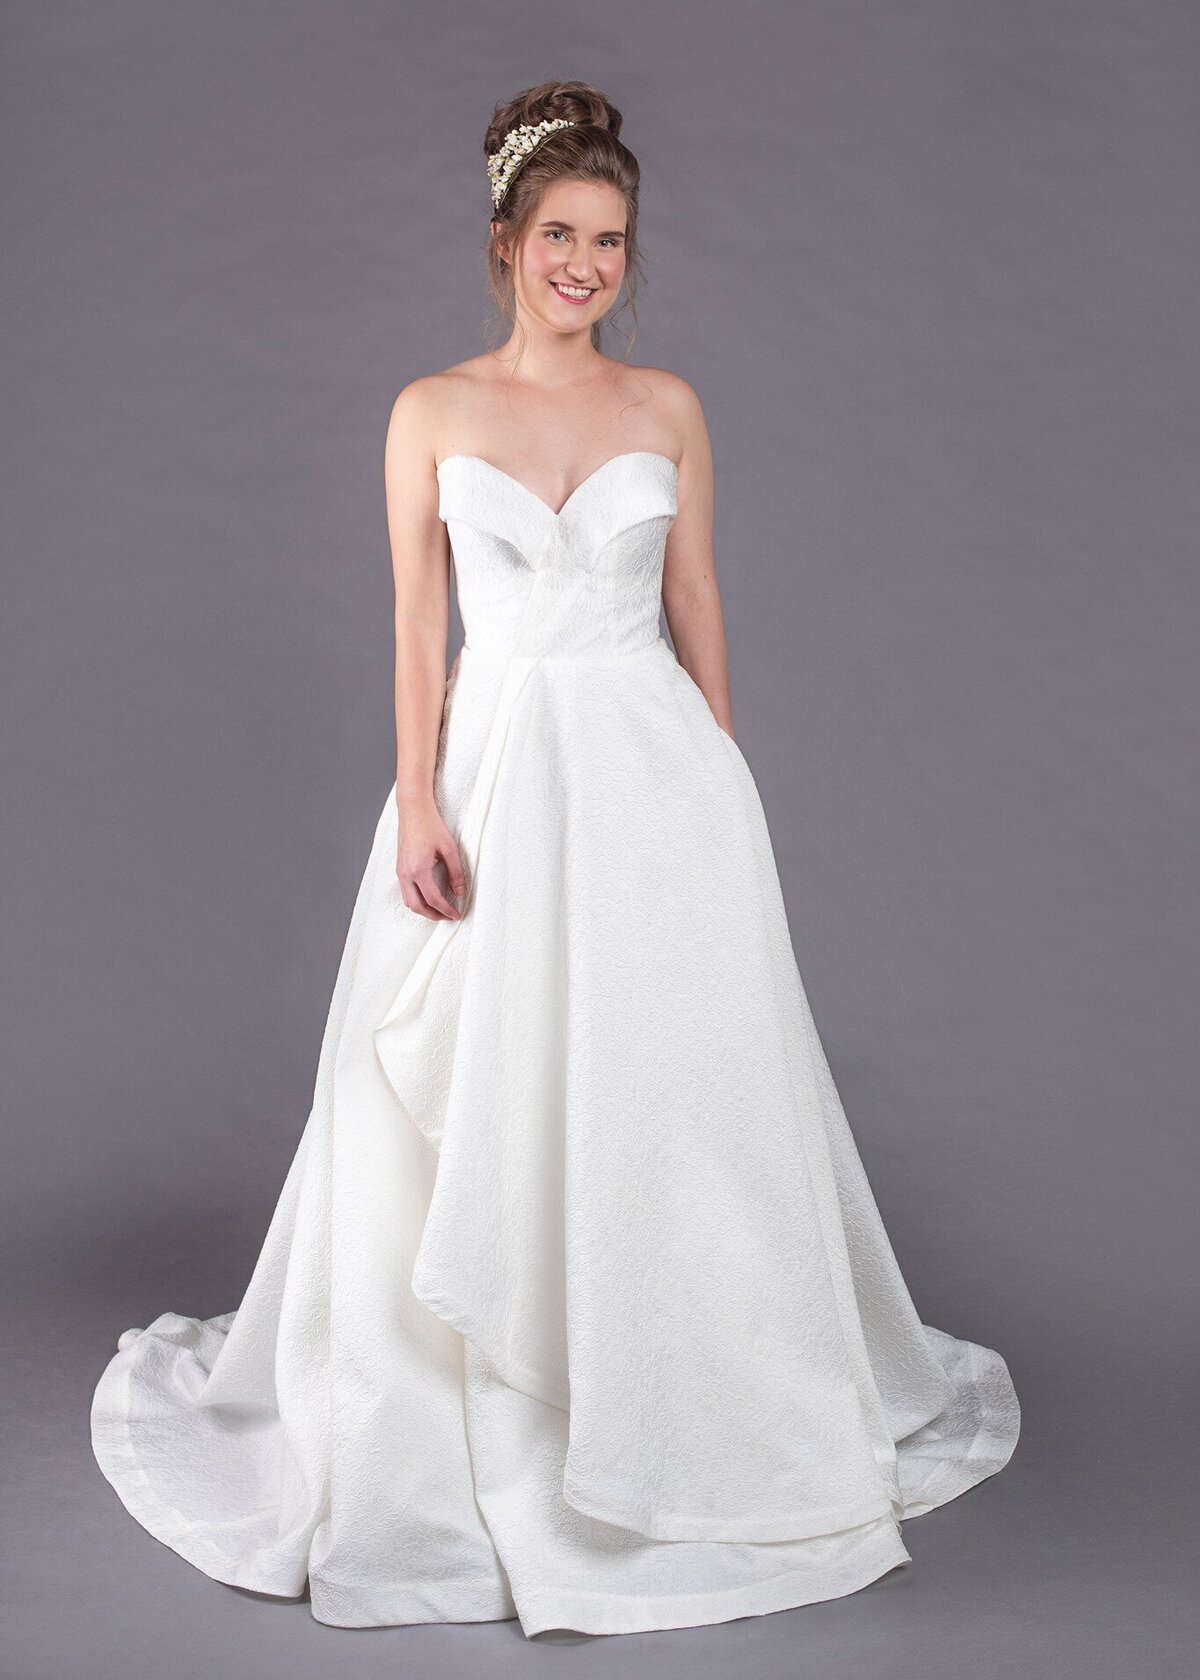 The Eloise bridal style is a strapless, textured wedding dress with pockets by indie bridal designer Edith Elan.